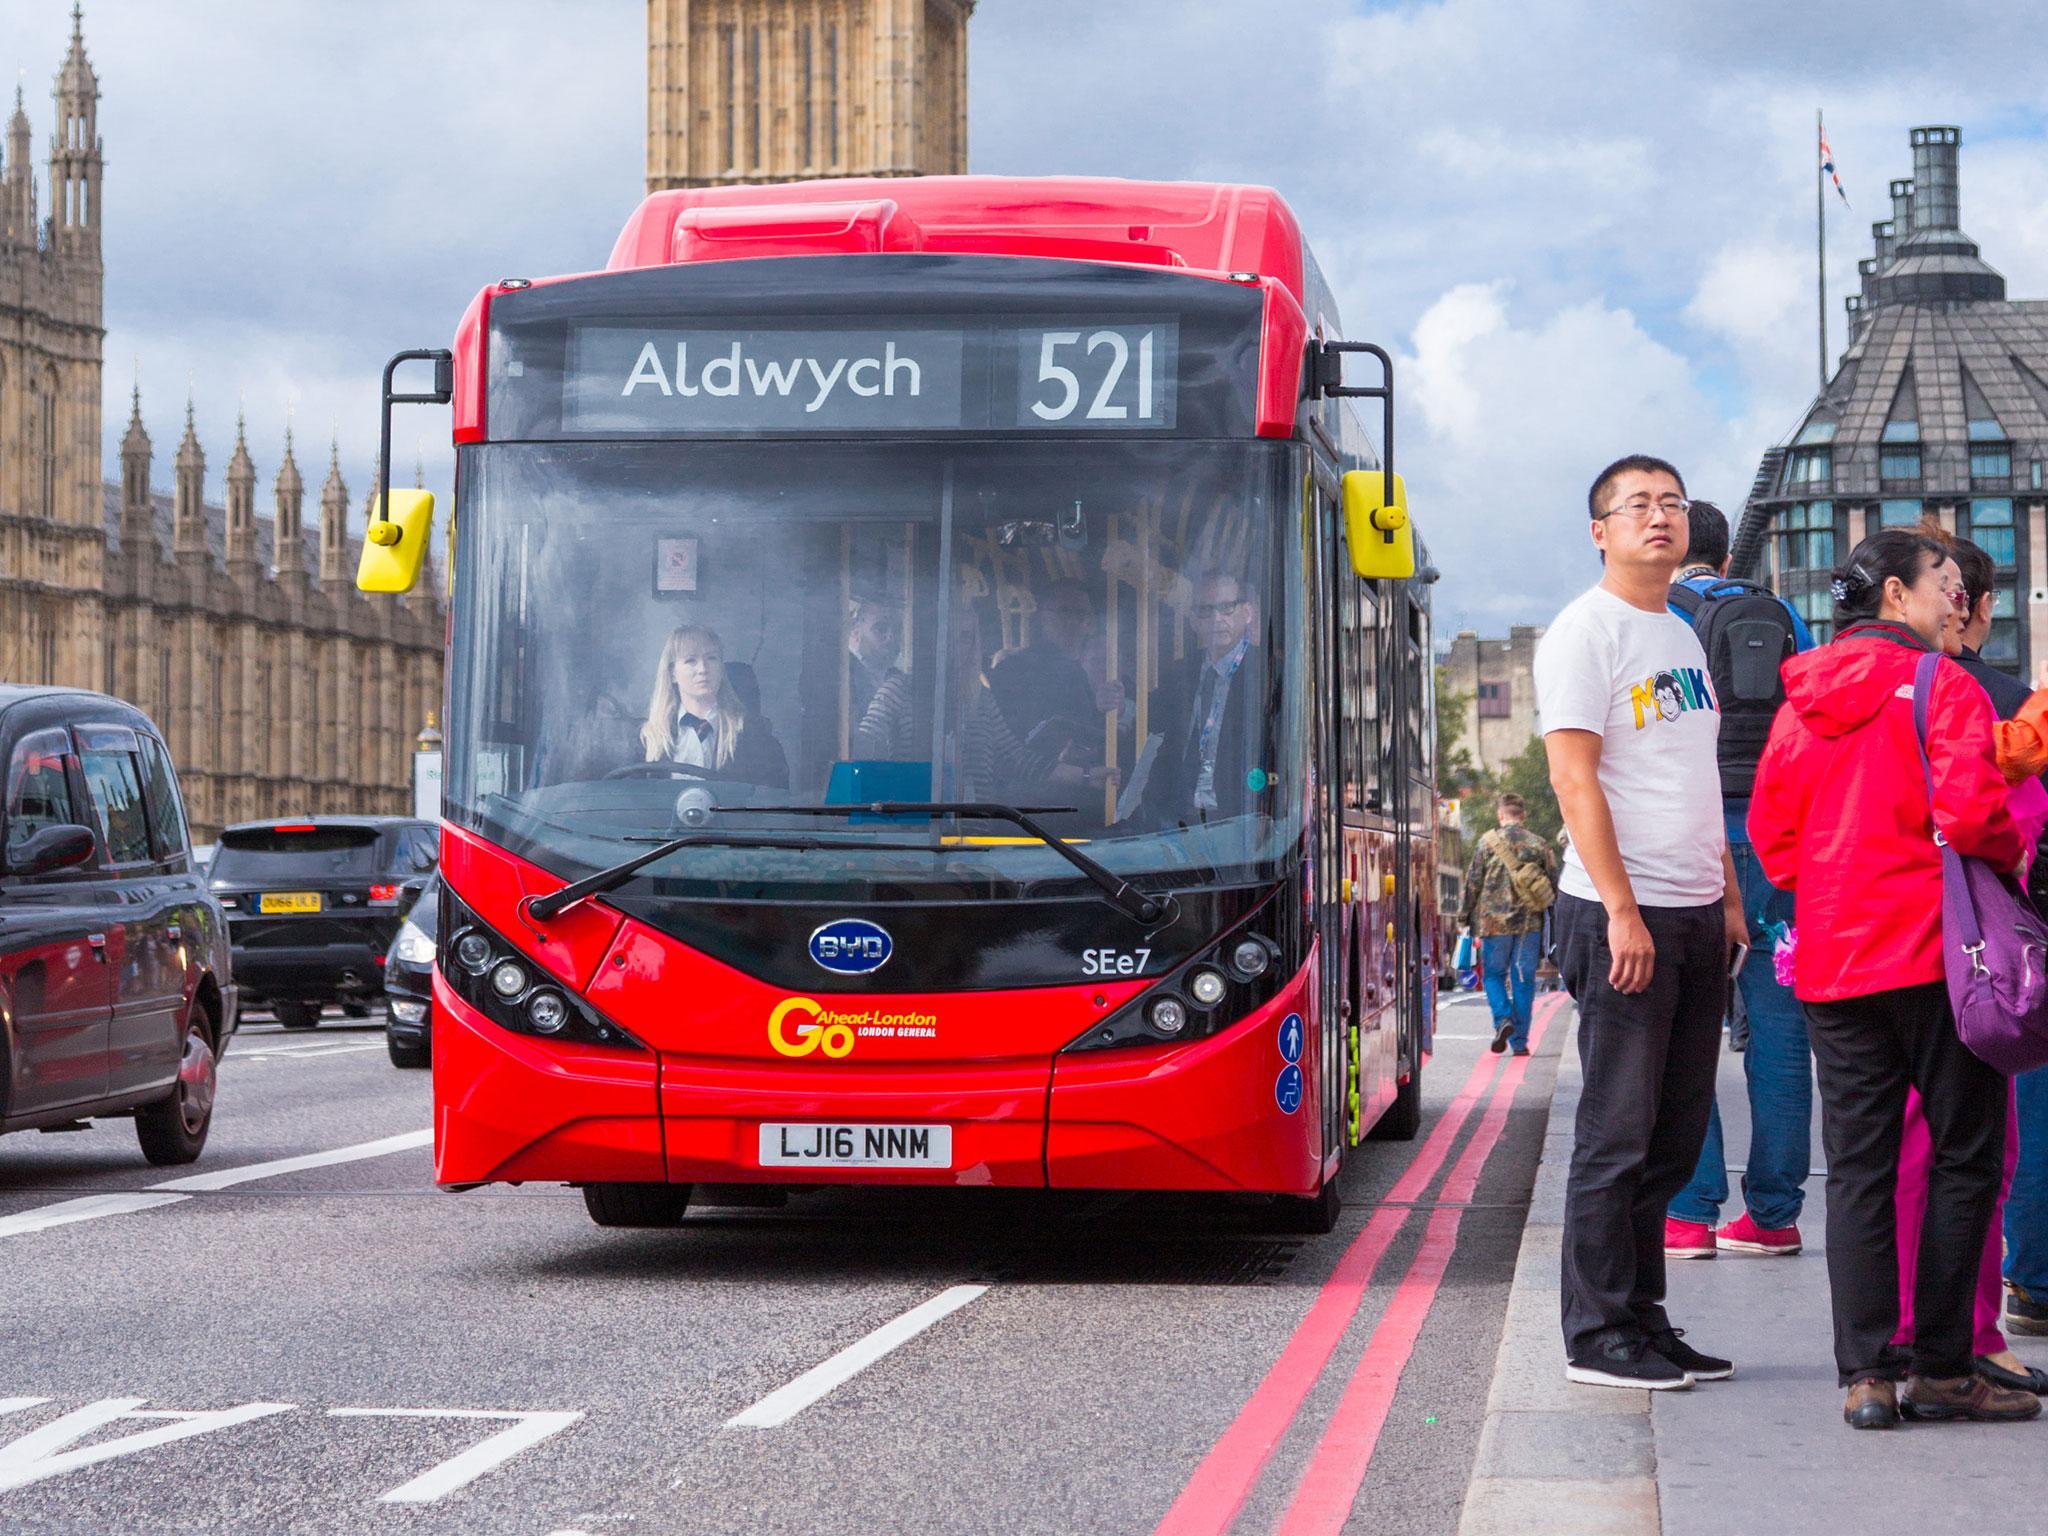 The total number of electric buses in service is forecast to more than triple, from 386,000 last year to about 1.2 million in 2025